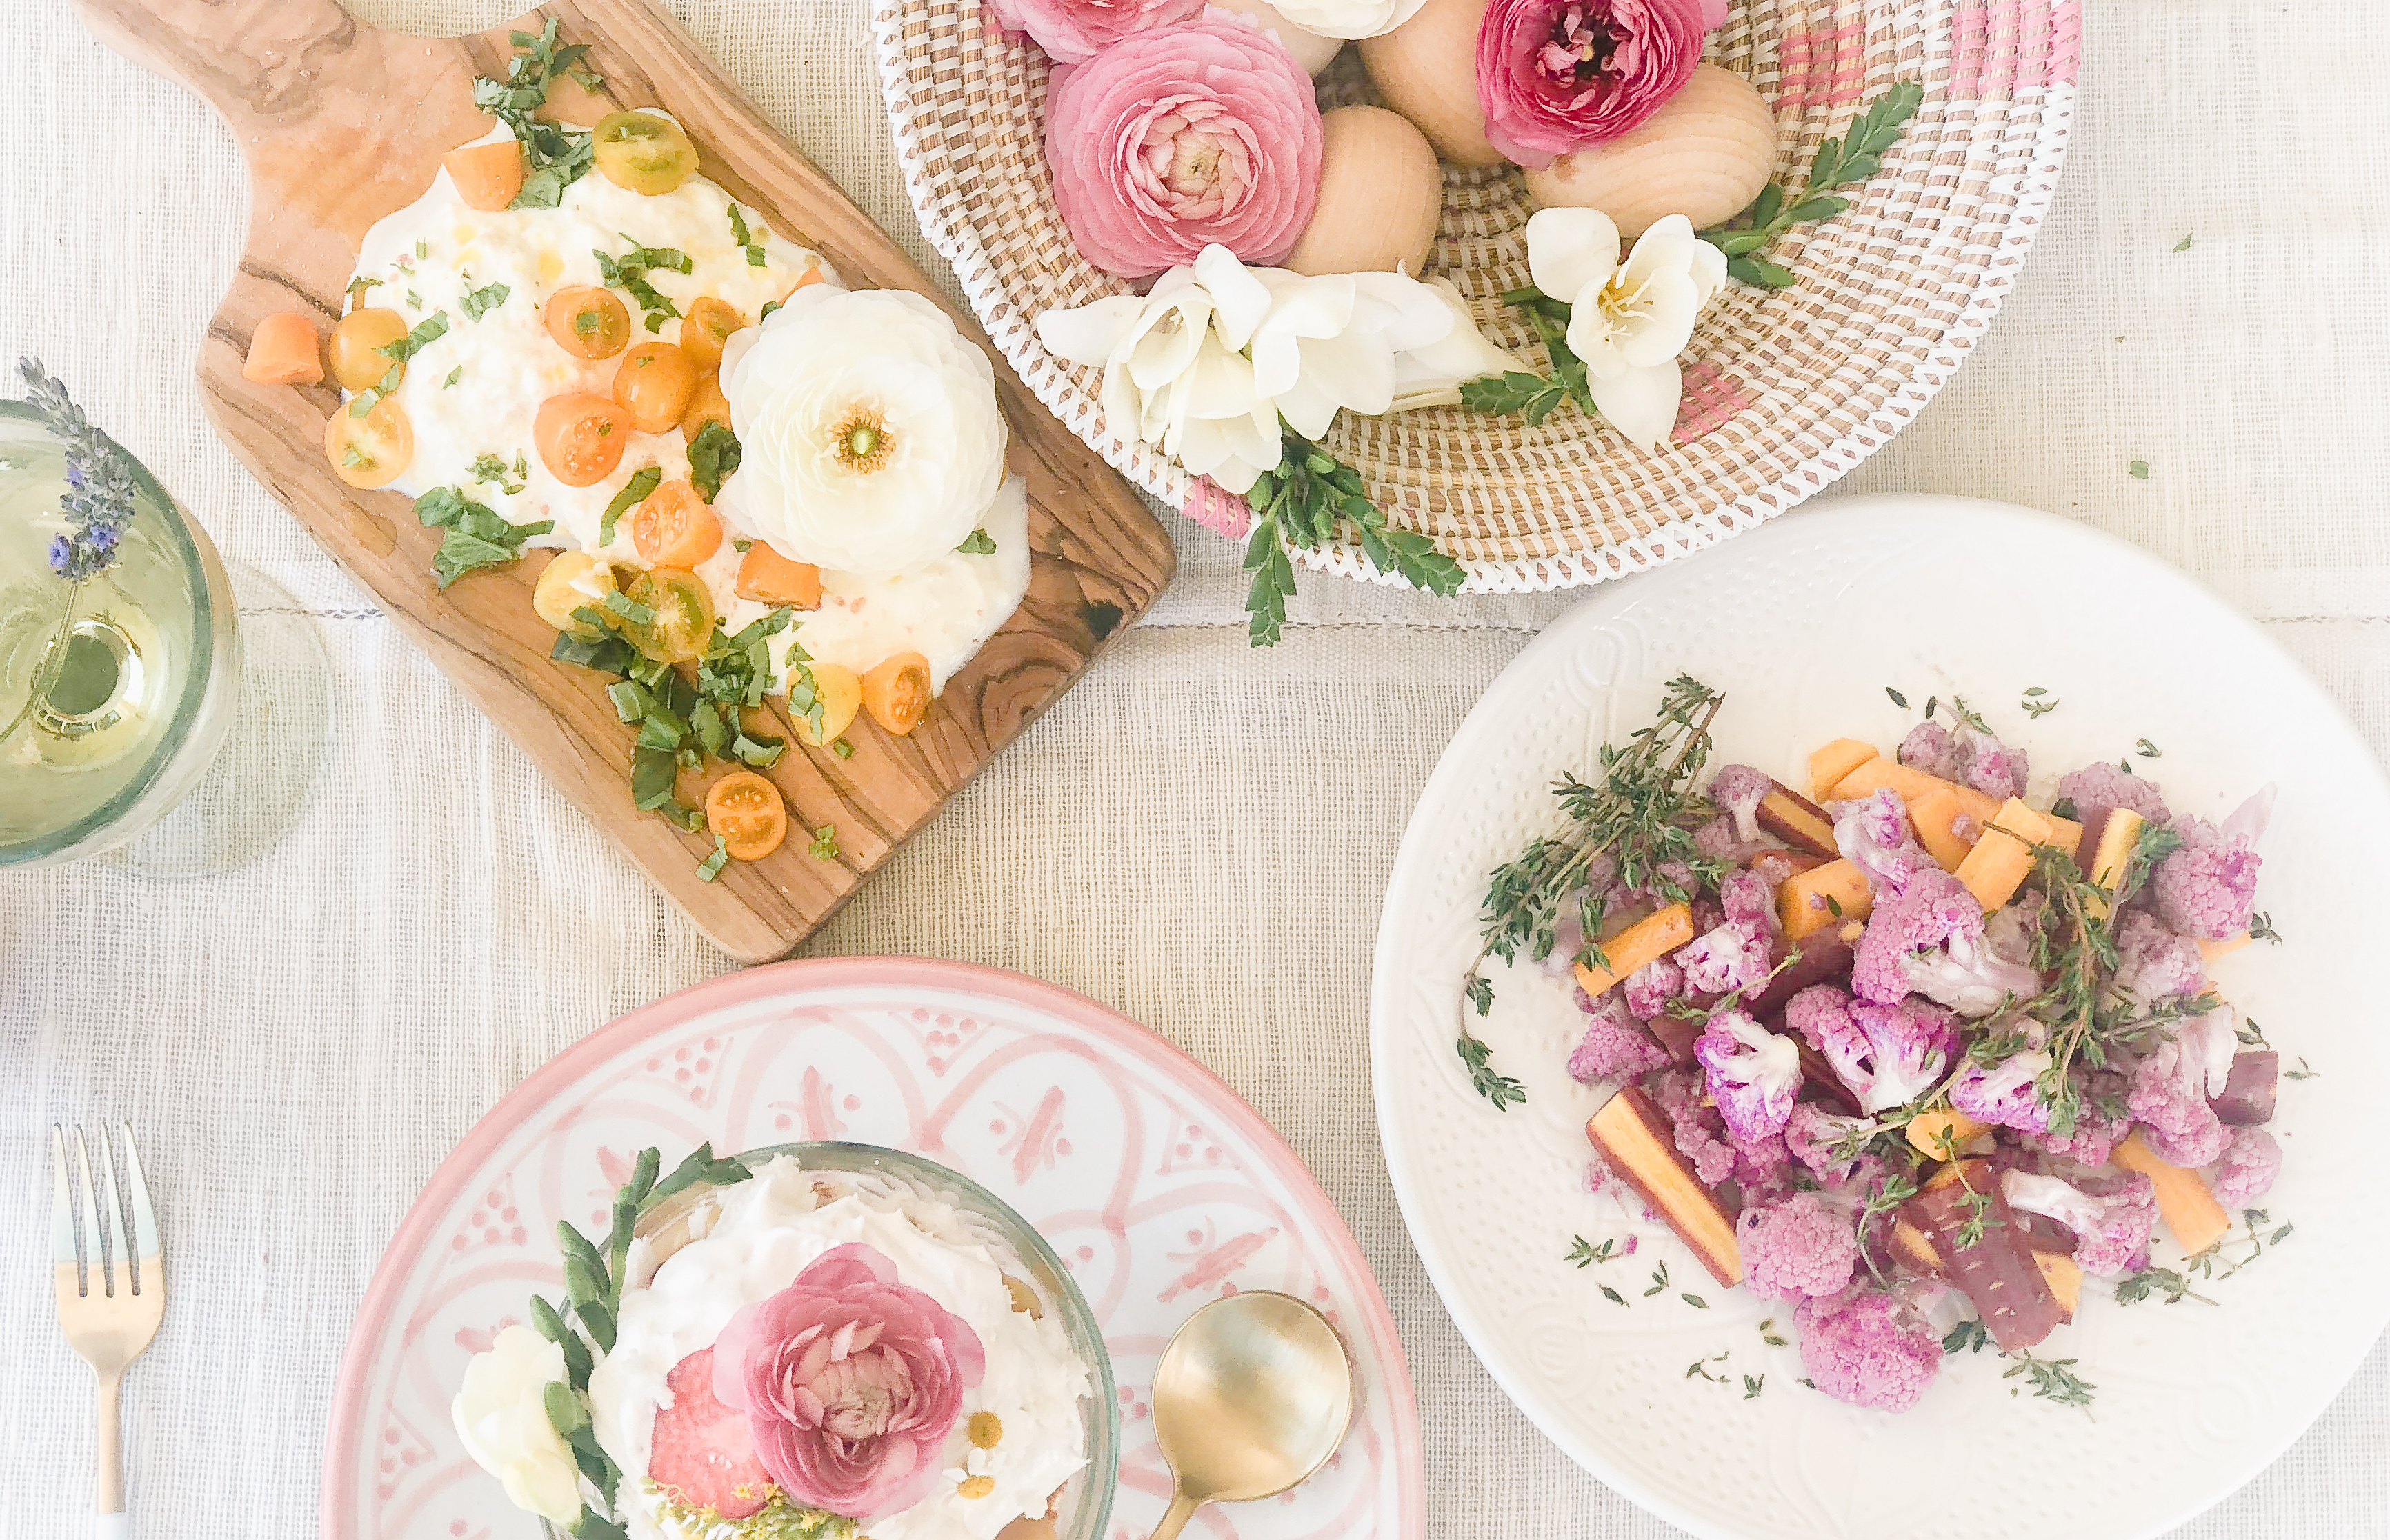 A Cheerful Easter Brunch with The Little Market